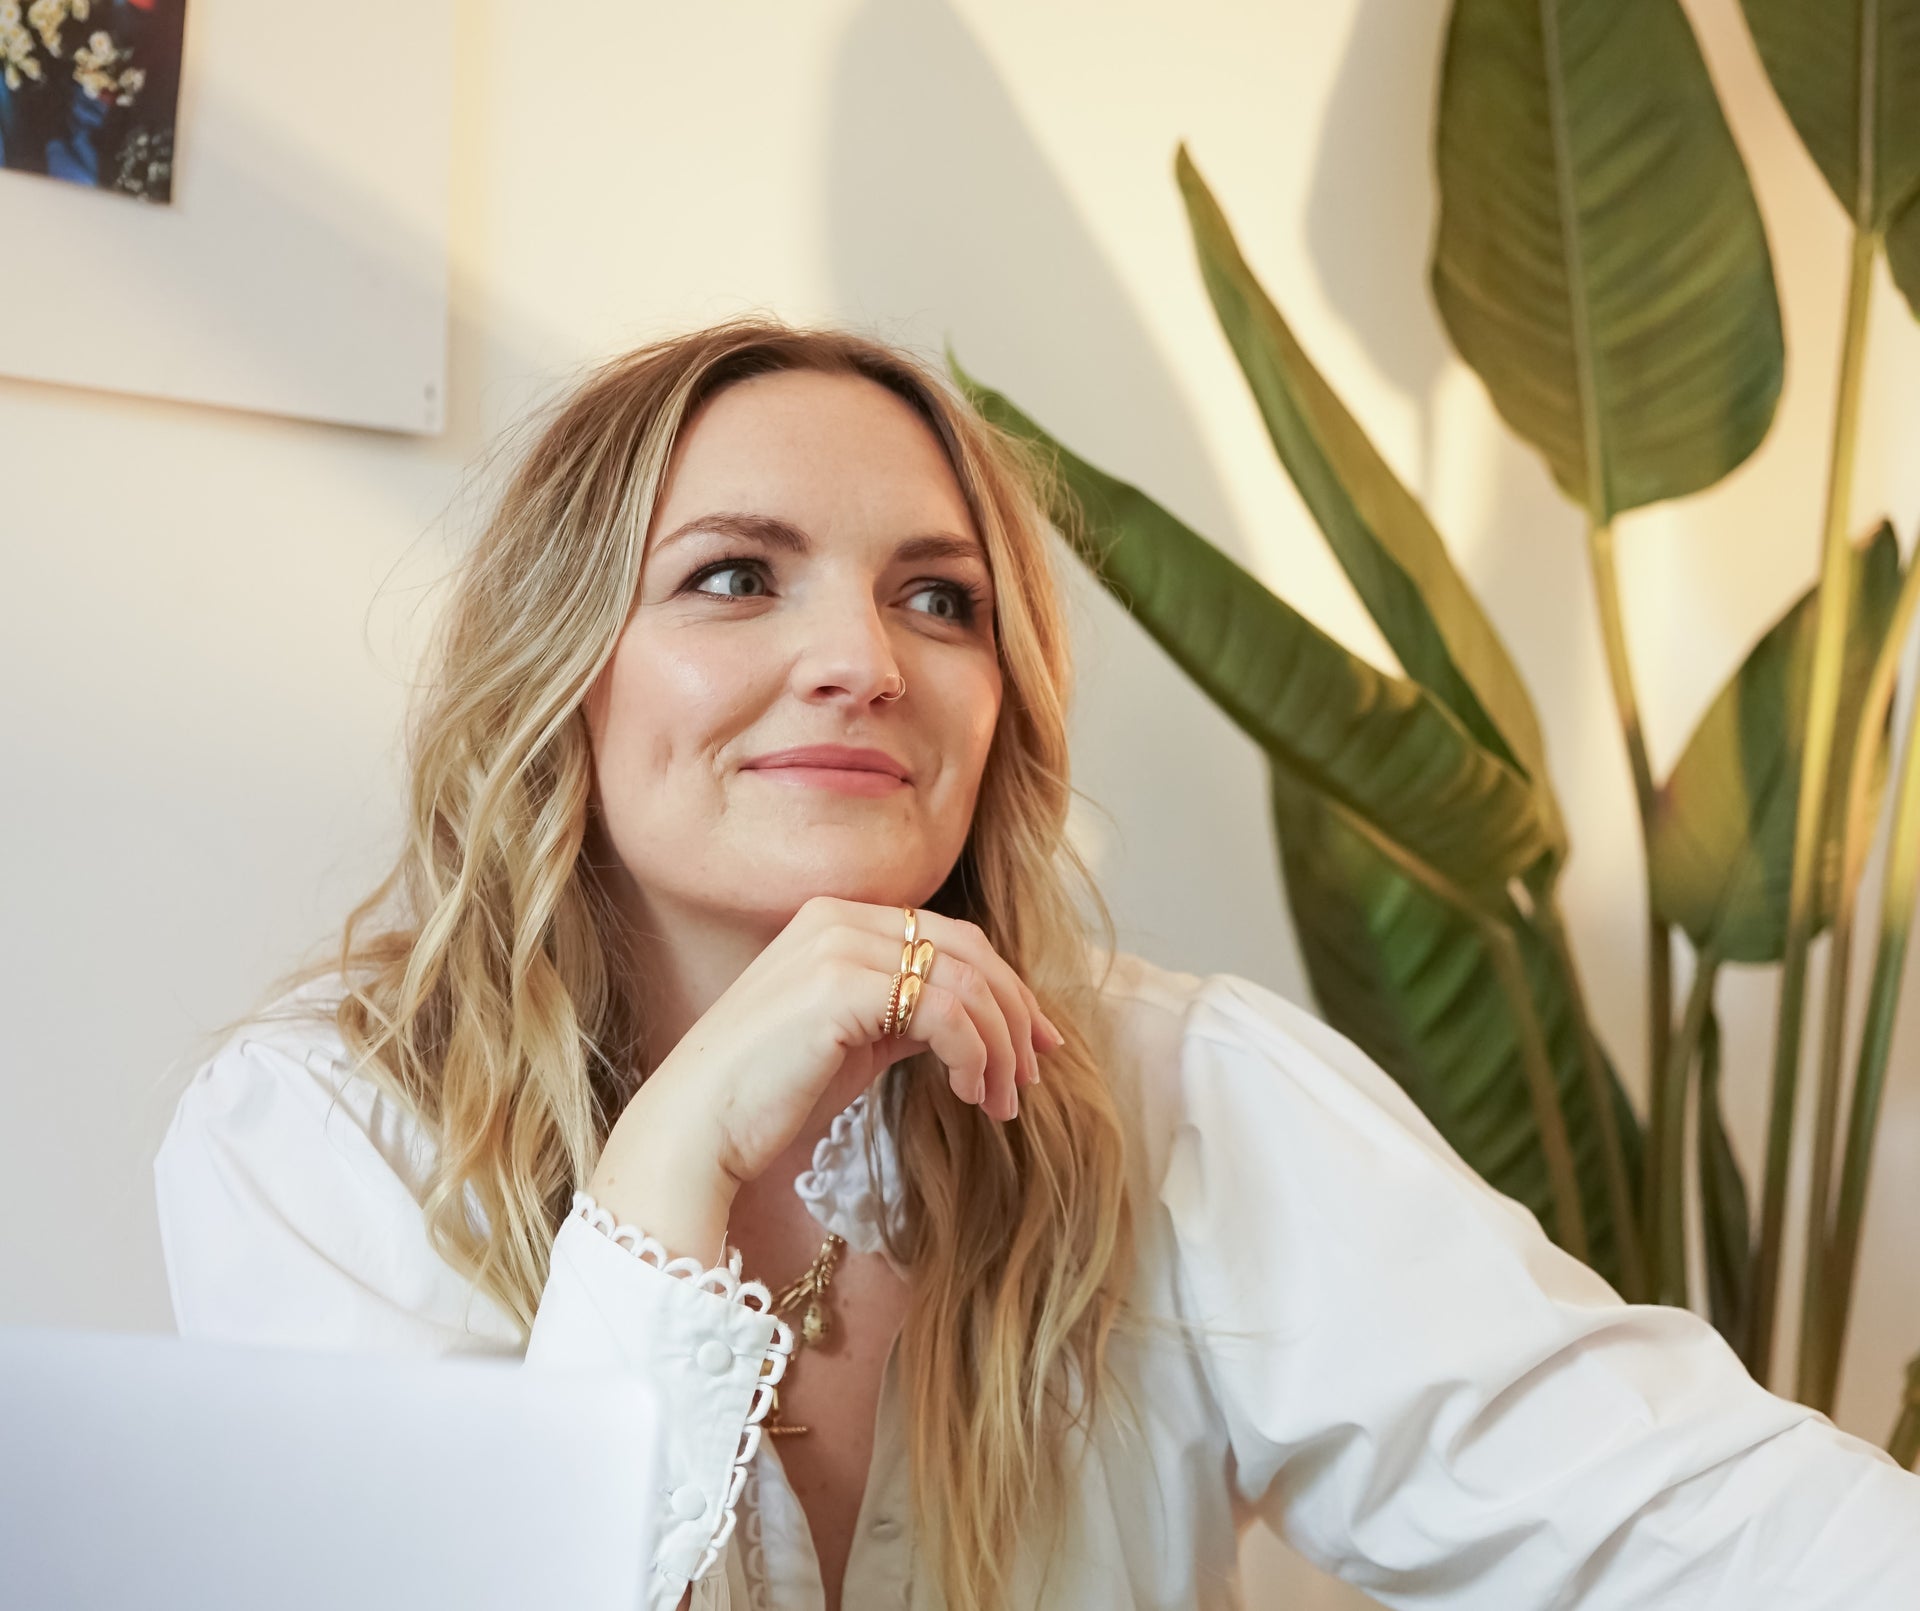 Daisy London's Founder Talks Wellbeing, Routines & Inside Her Daily Toolkit